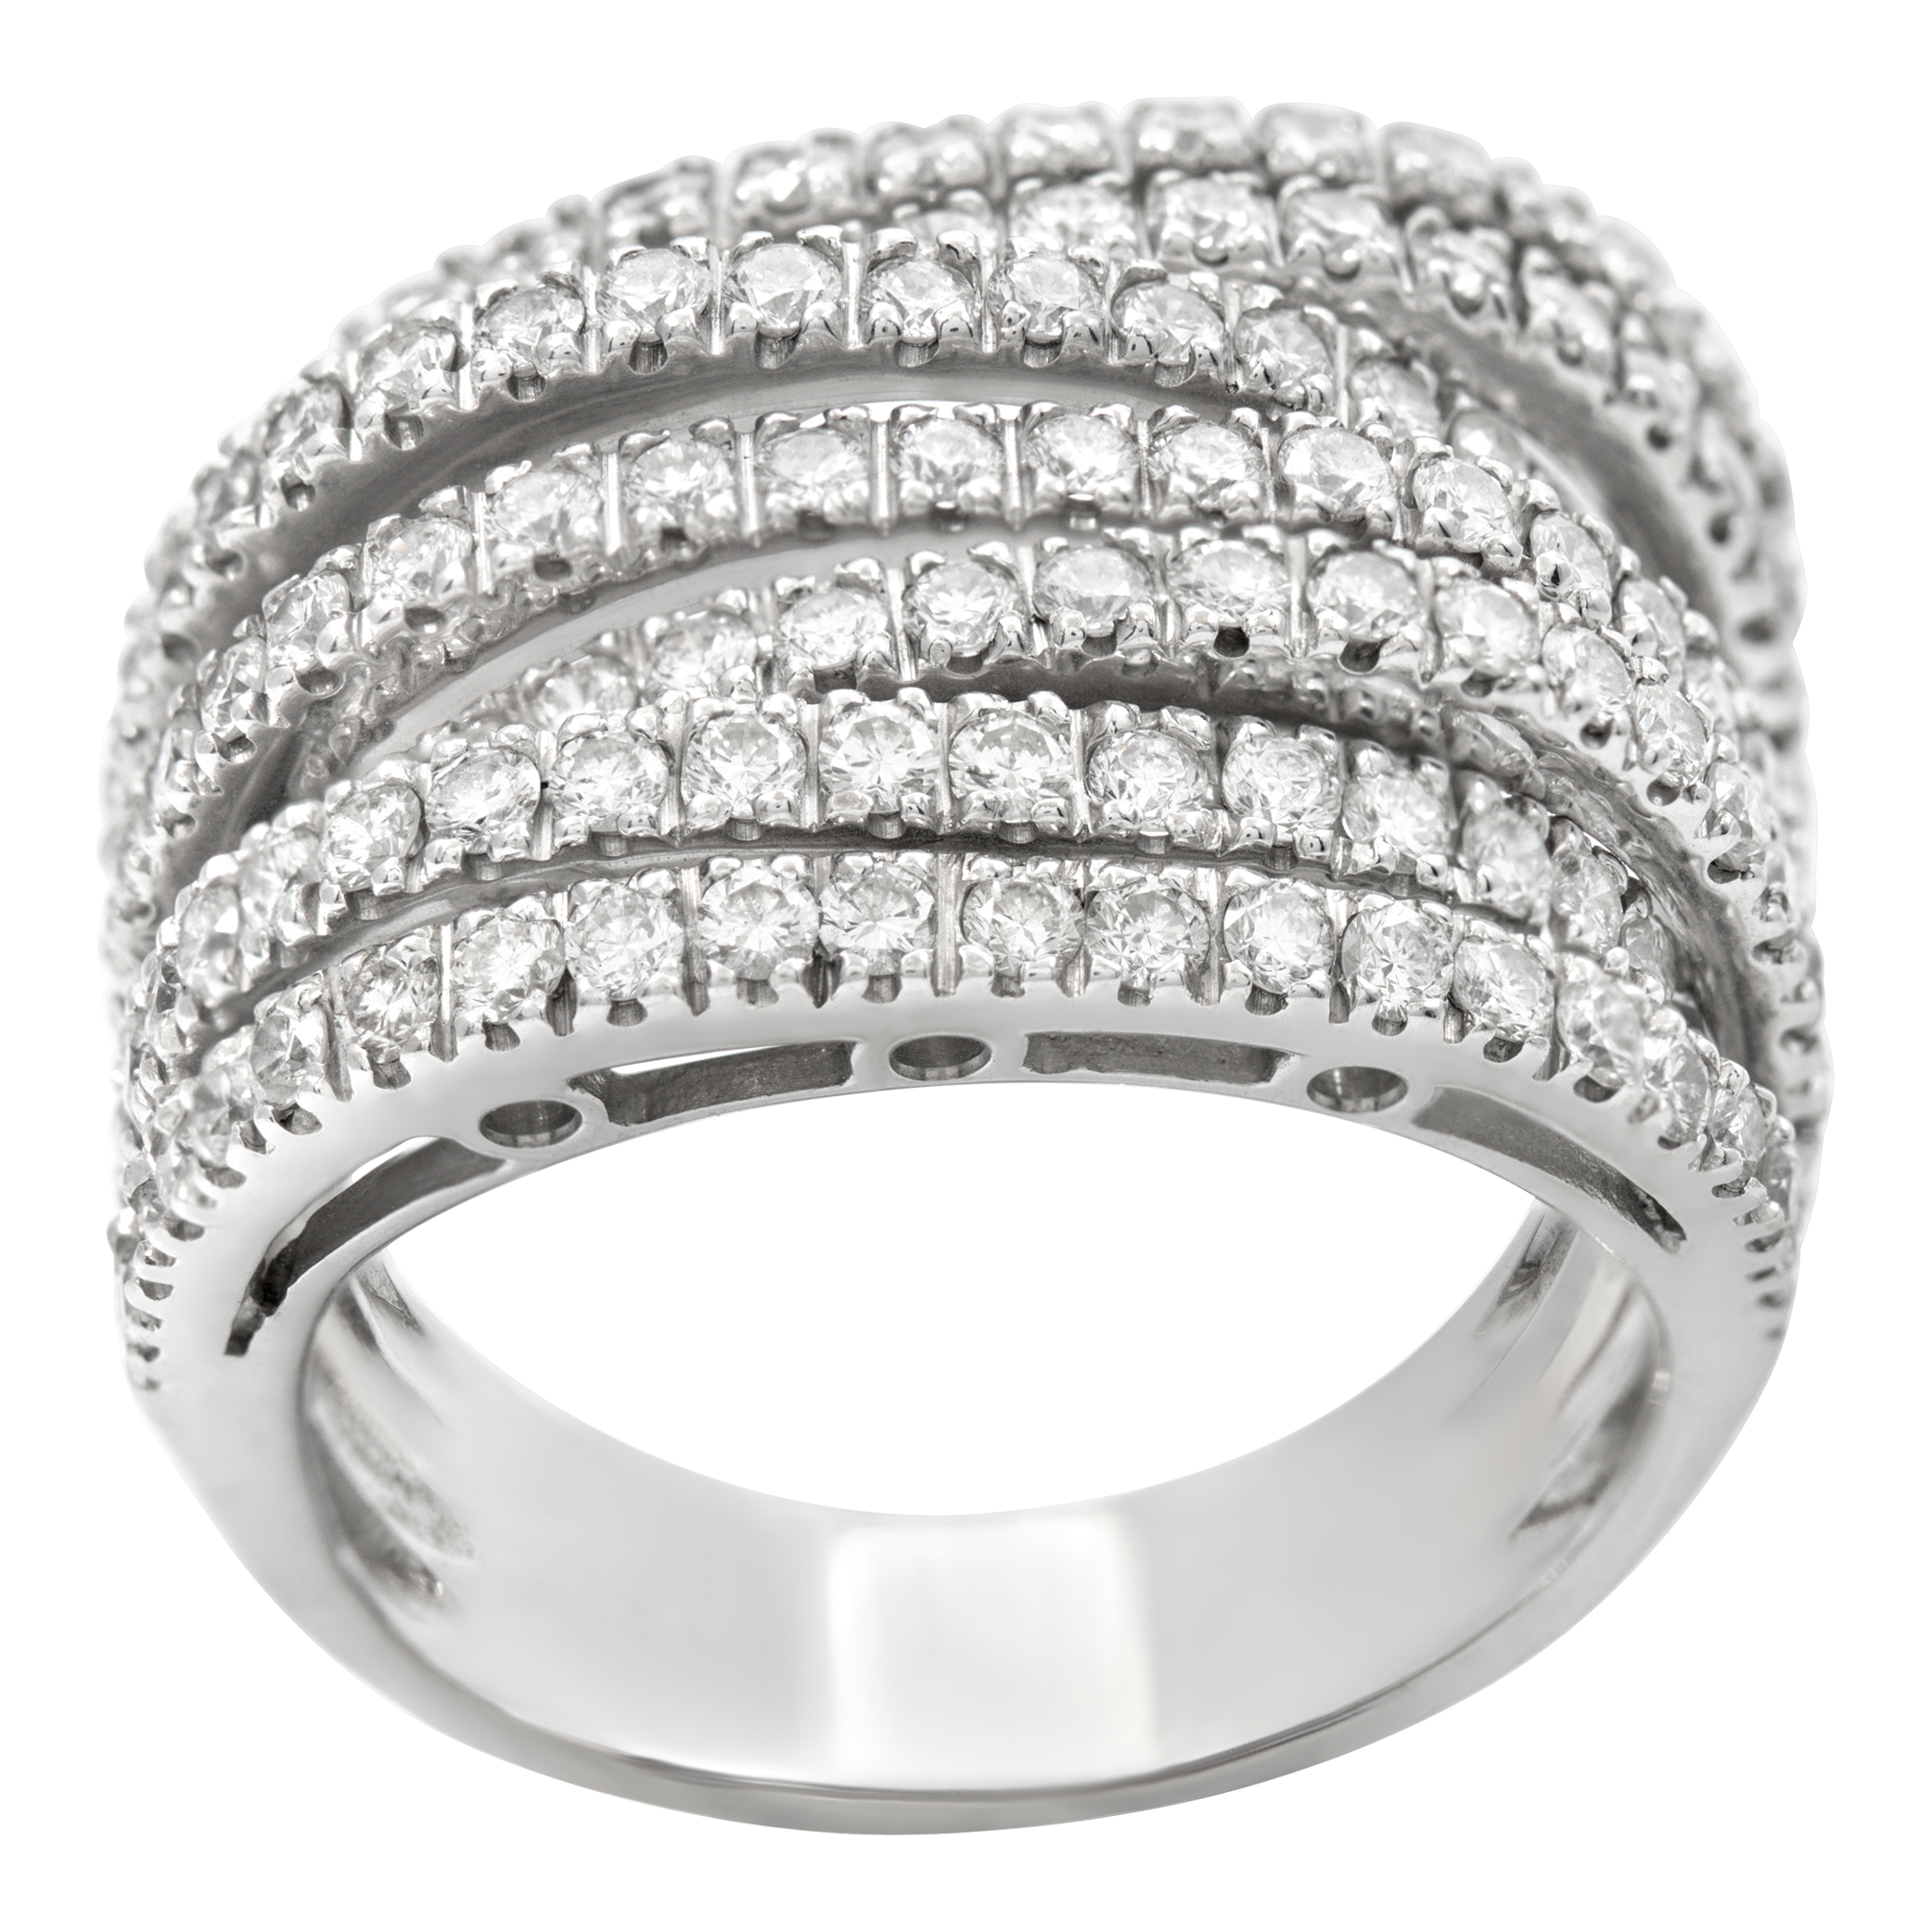 Wide seven rows diamonds ring in 18K white gold. Round brilliant cut diamond total approx. weight: 2.00 carats